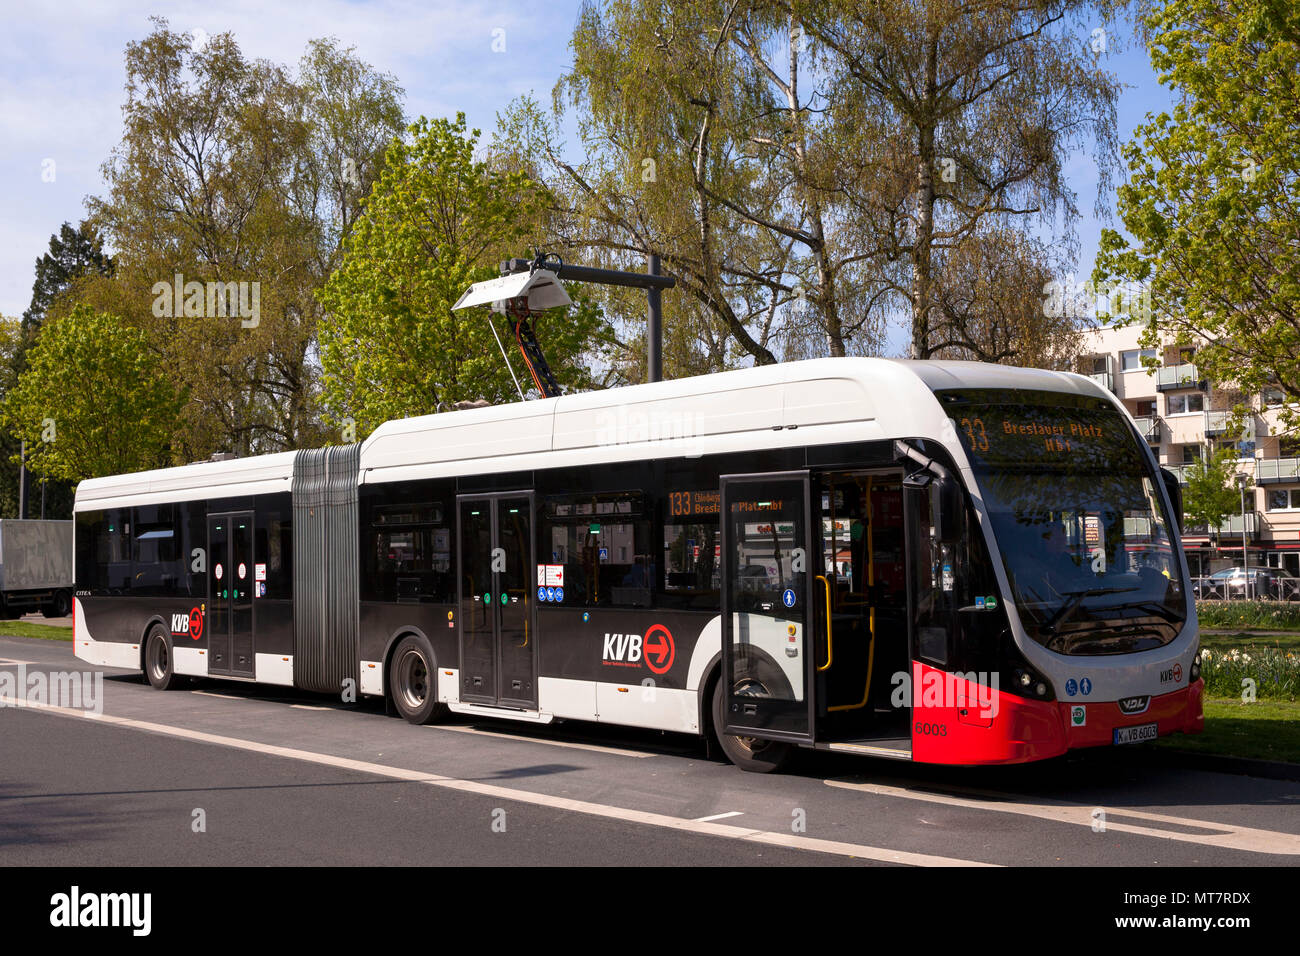 electric bus of the line 133 at a charging station at Hoeninger Platz, Cologne, Germany.  Elektrobus der Linie 133 an einer Ladestation am Hoeninger P Stock Photo